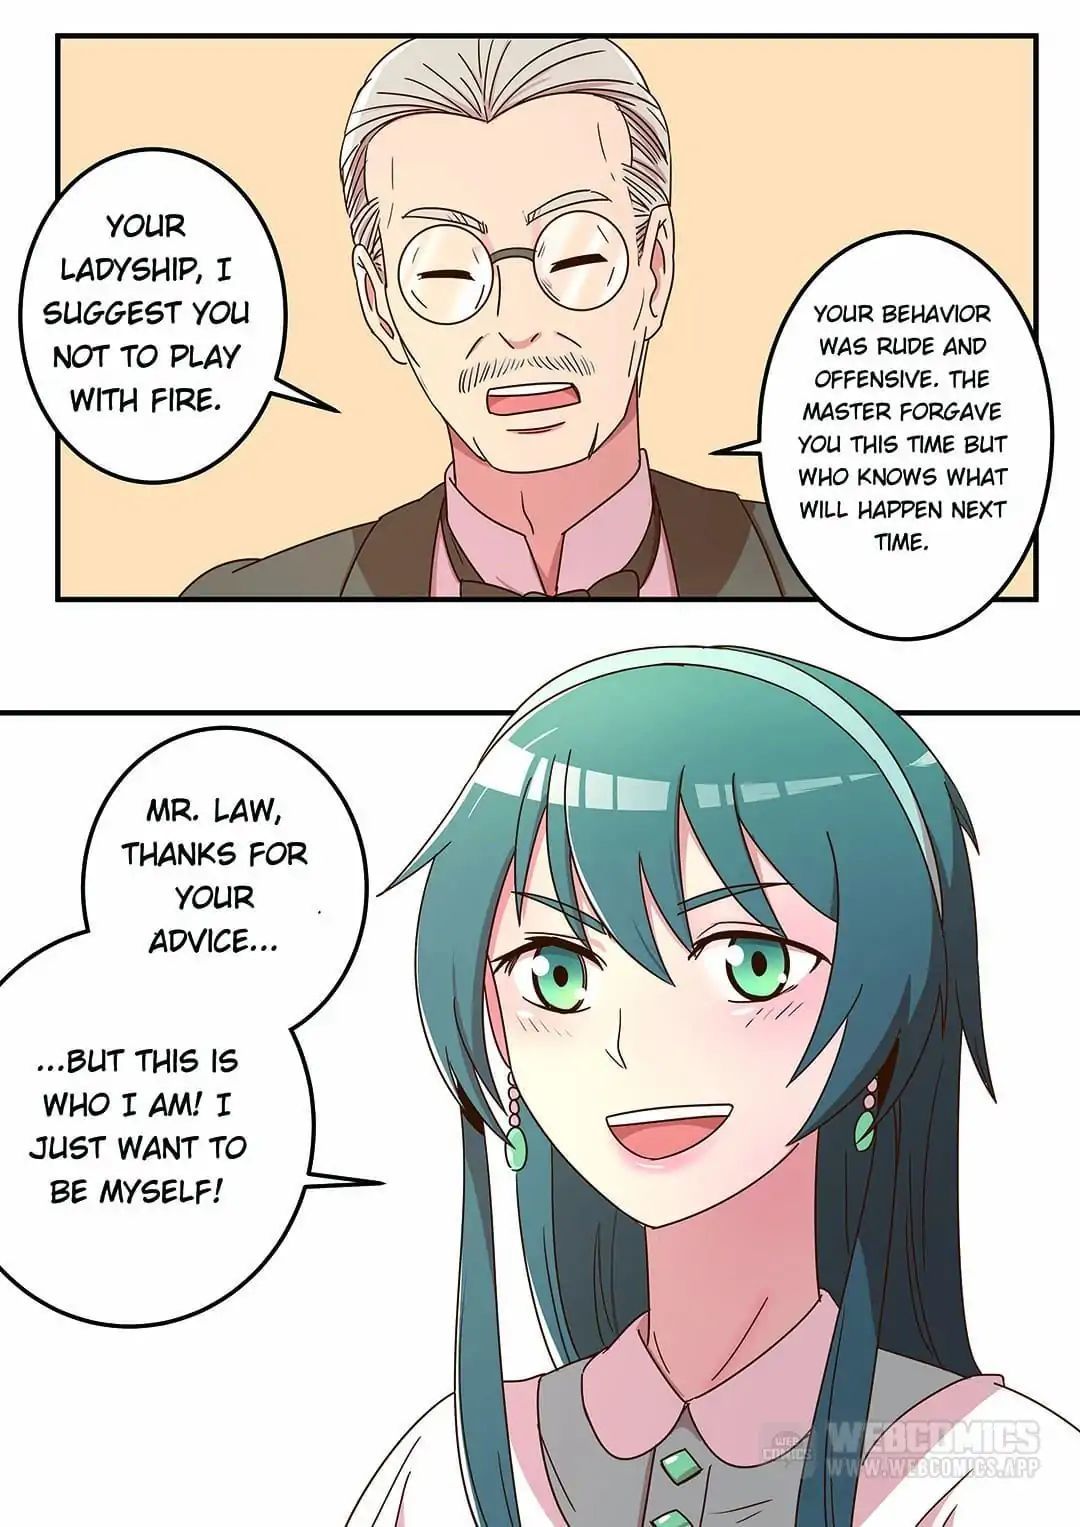 Miss. Delinquent 恶女千金 Chapter 11 - page 7